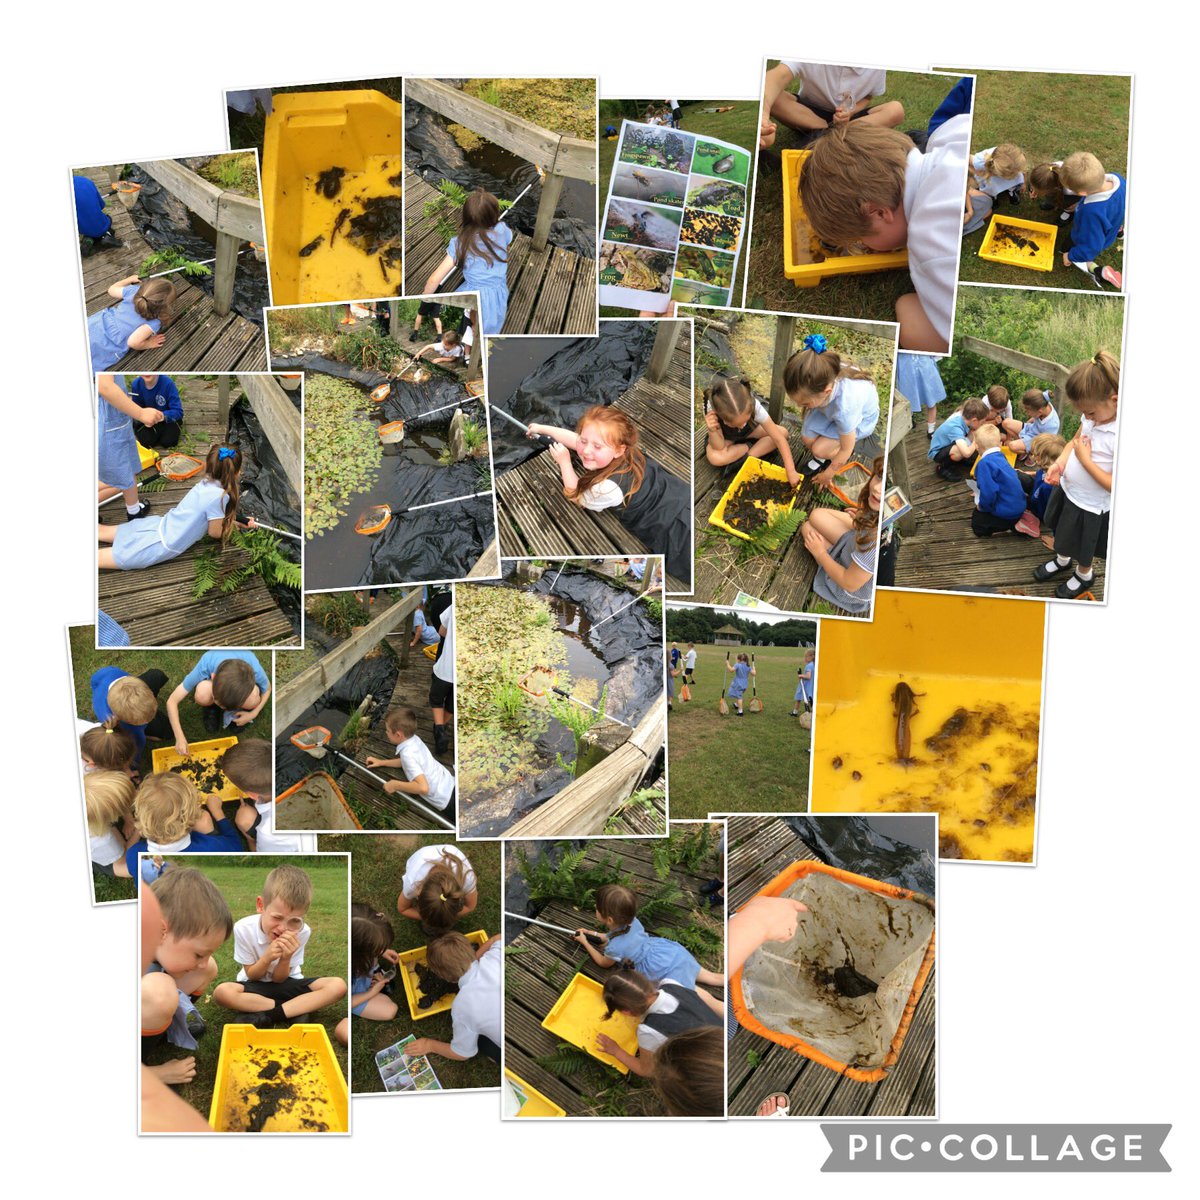 We had the best time pond dipping and spotted lots of different creatures! Ask the lions what they found 🦁💛 @Astley_Primary #pond #outdoorlearning #weareACE